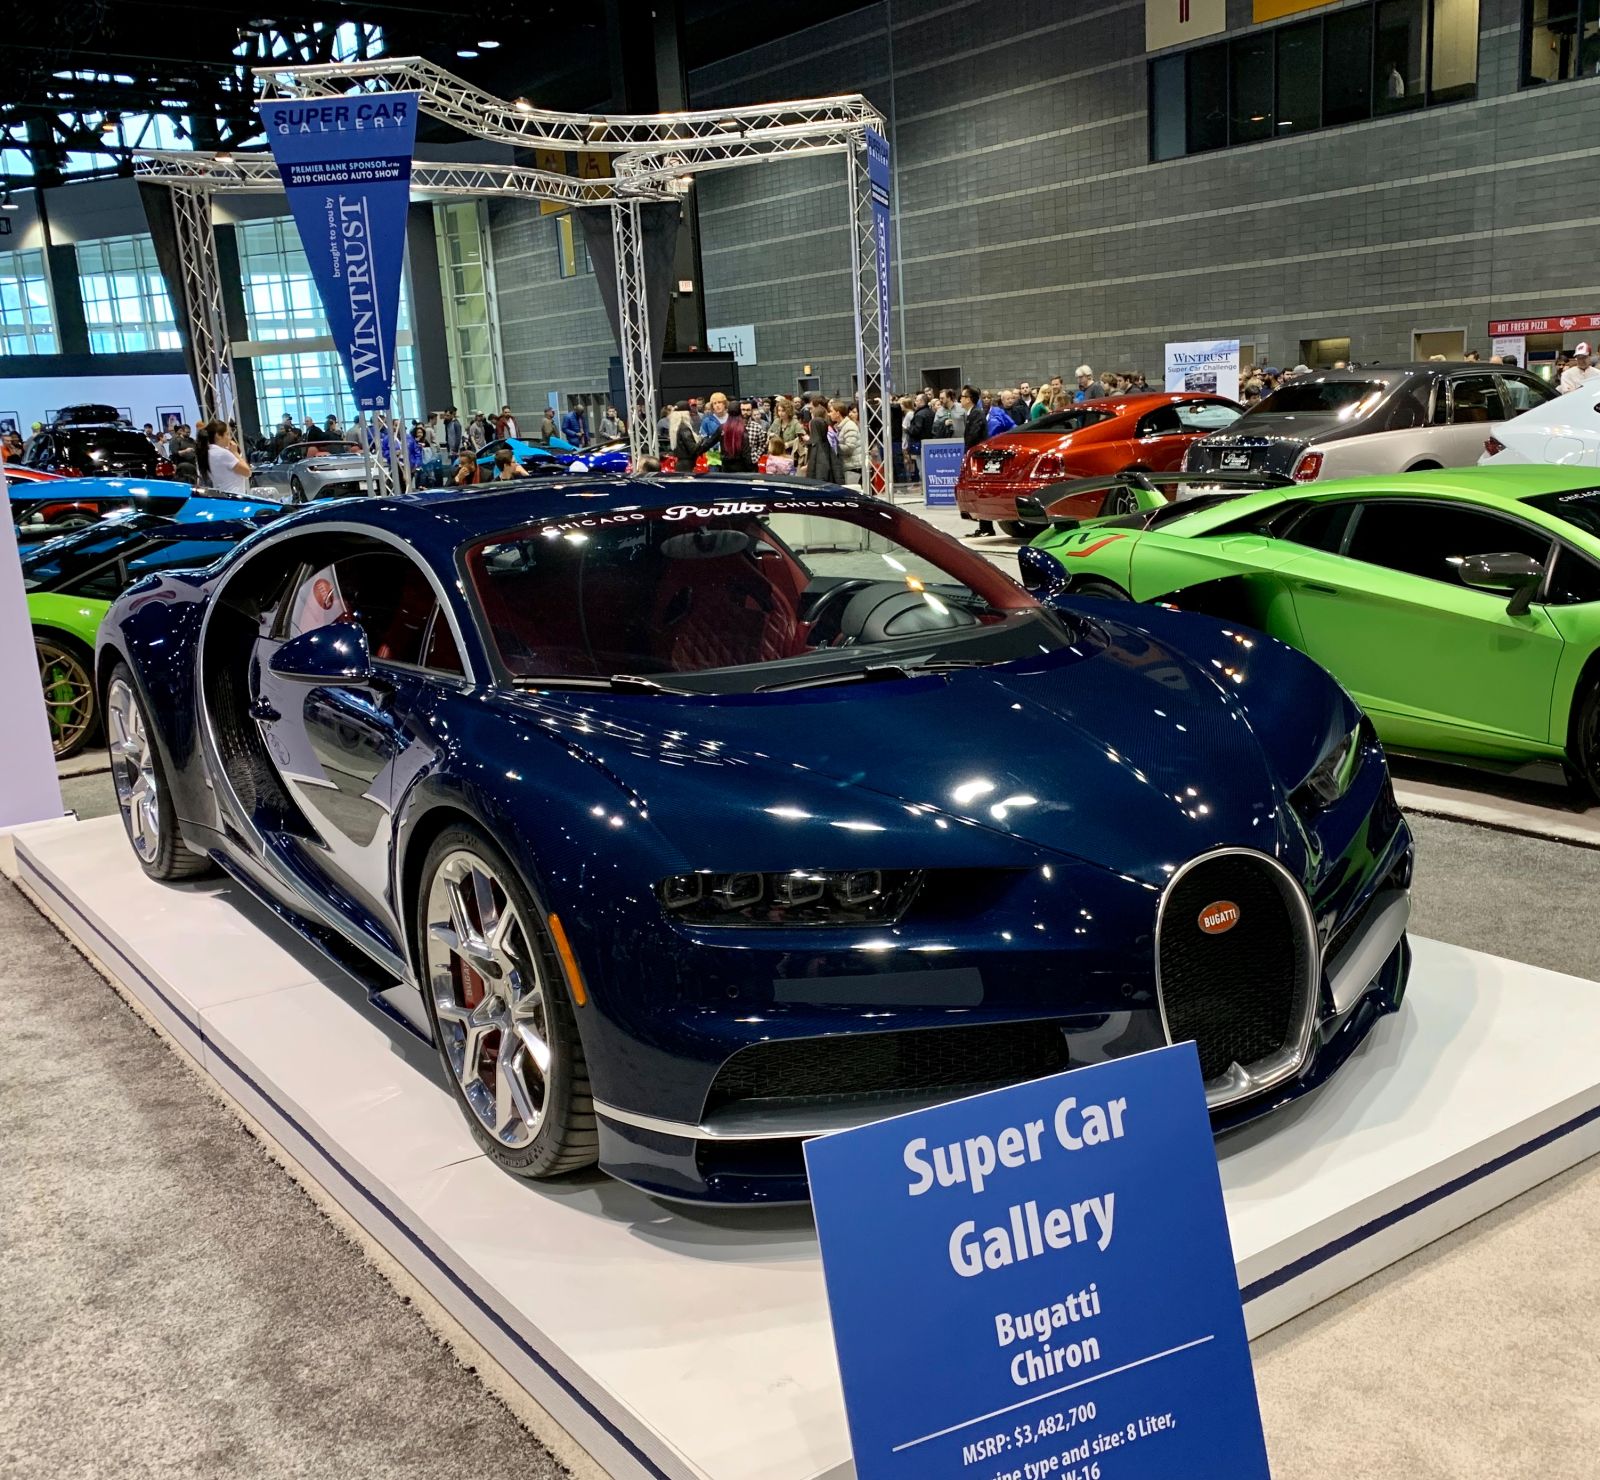 Illustration for article titled Highlights from the 2019 Chicago Auto Show